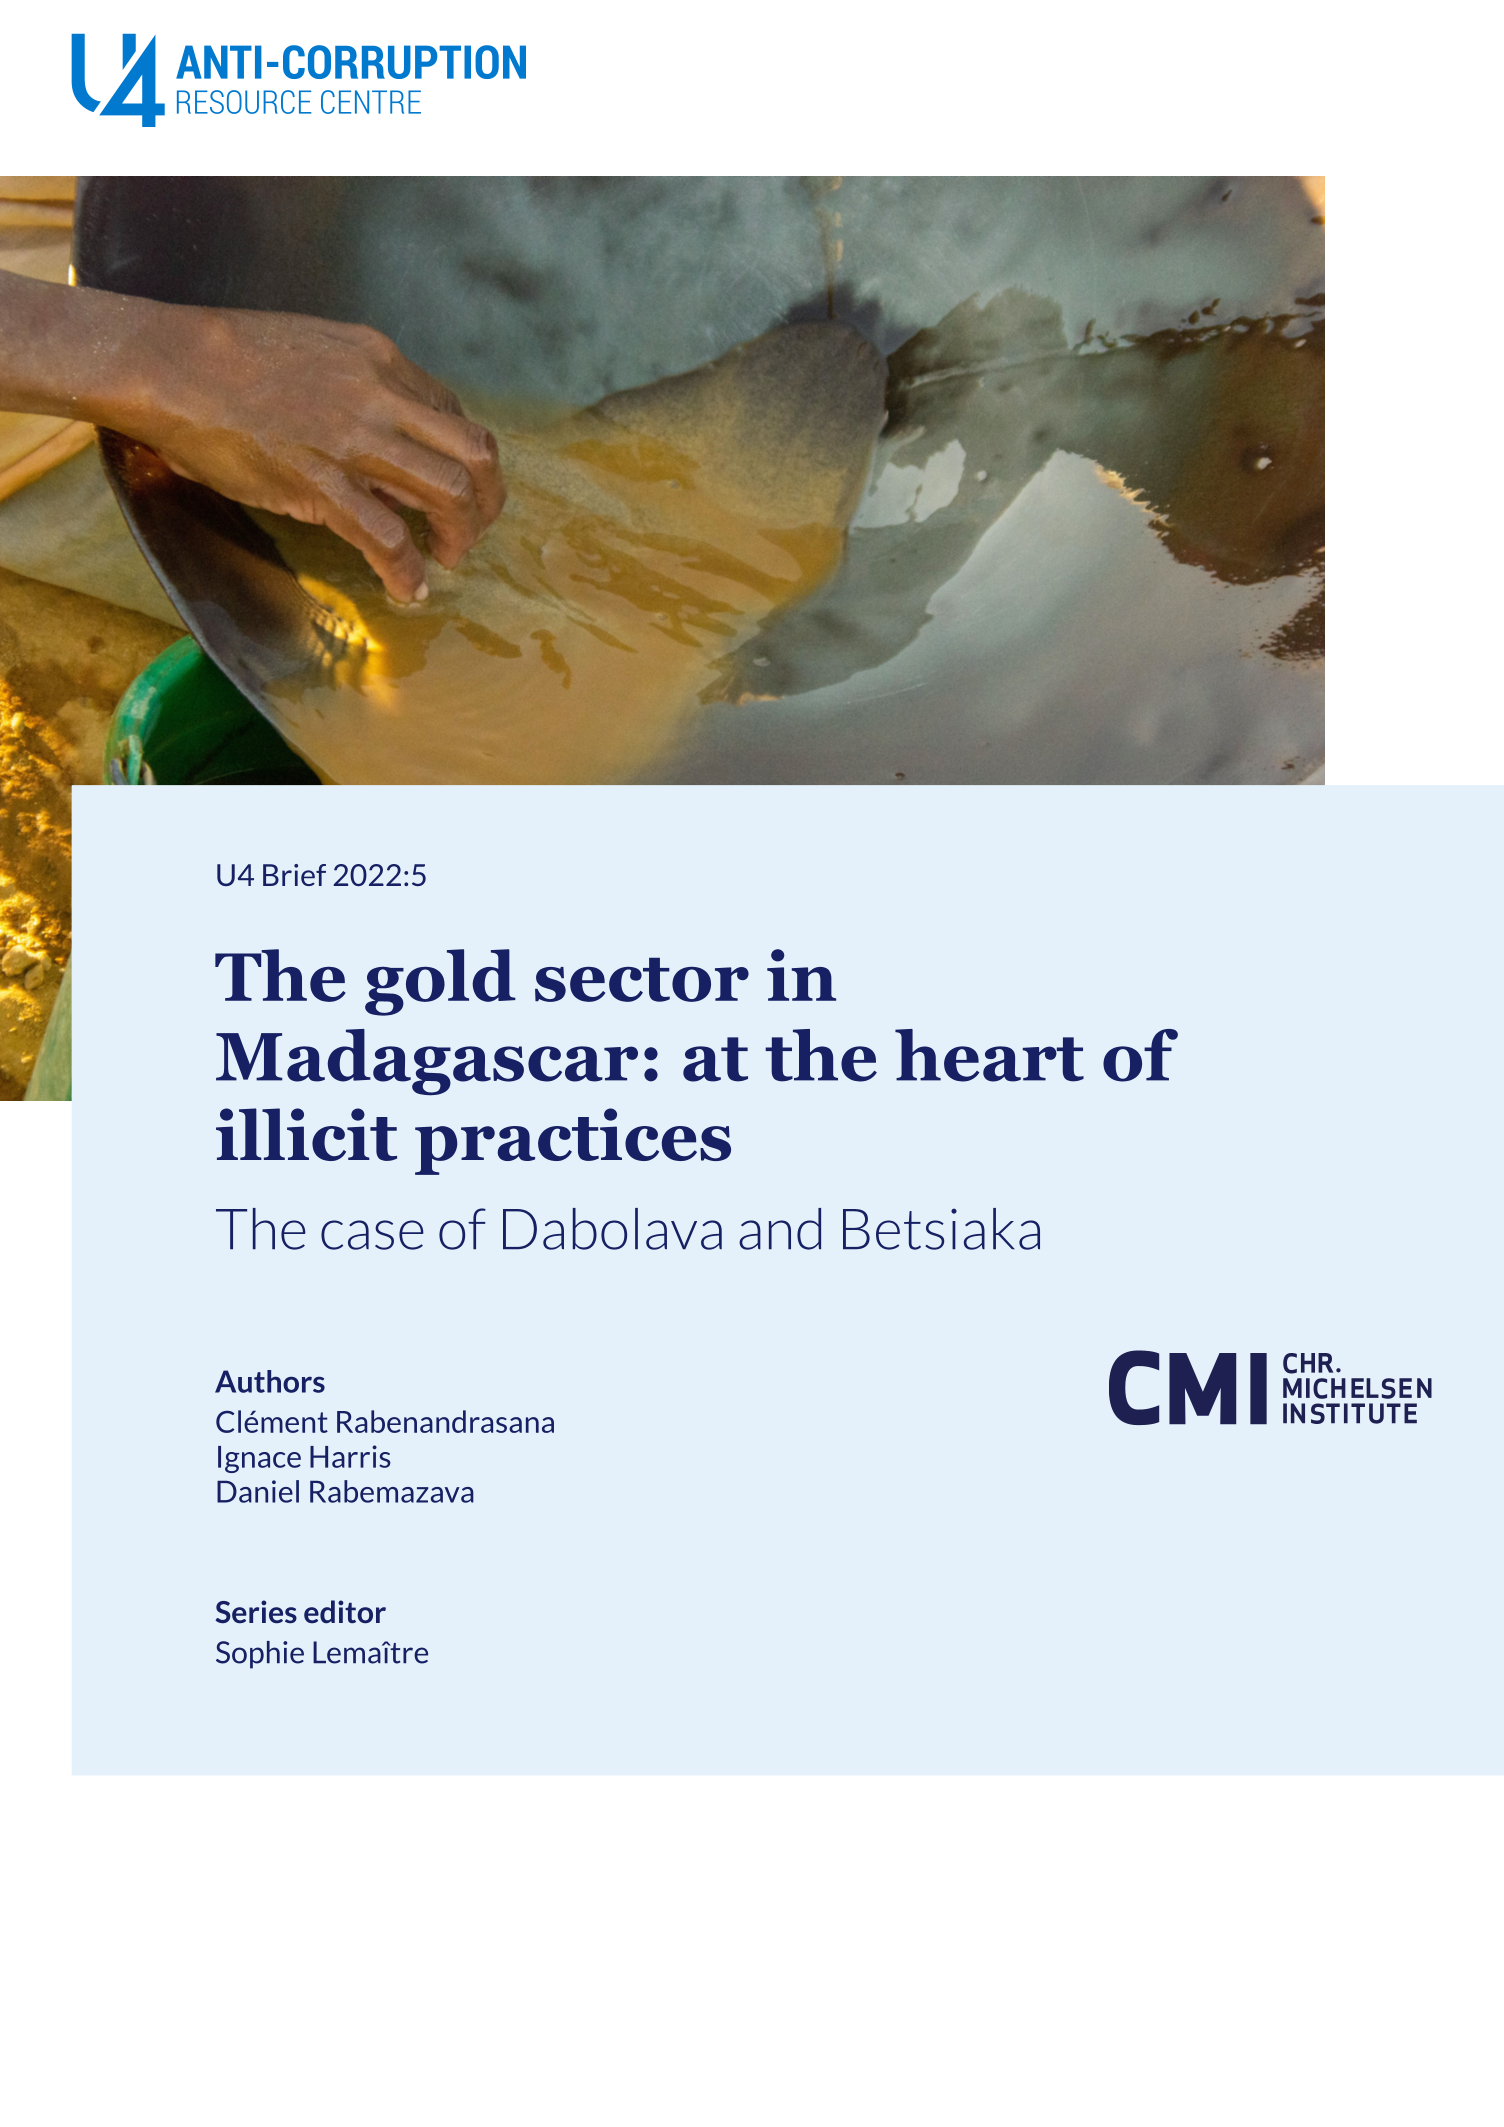 The gold sector in Madagascar: at the heart of illicit practices